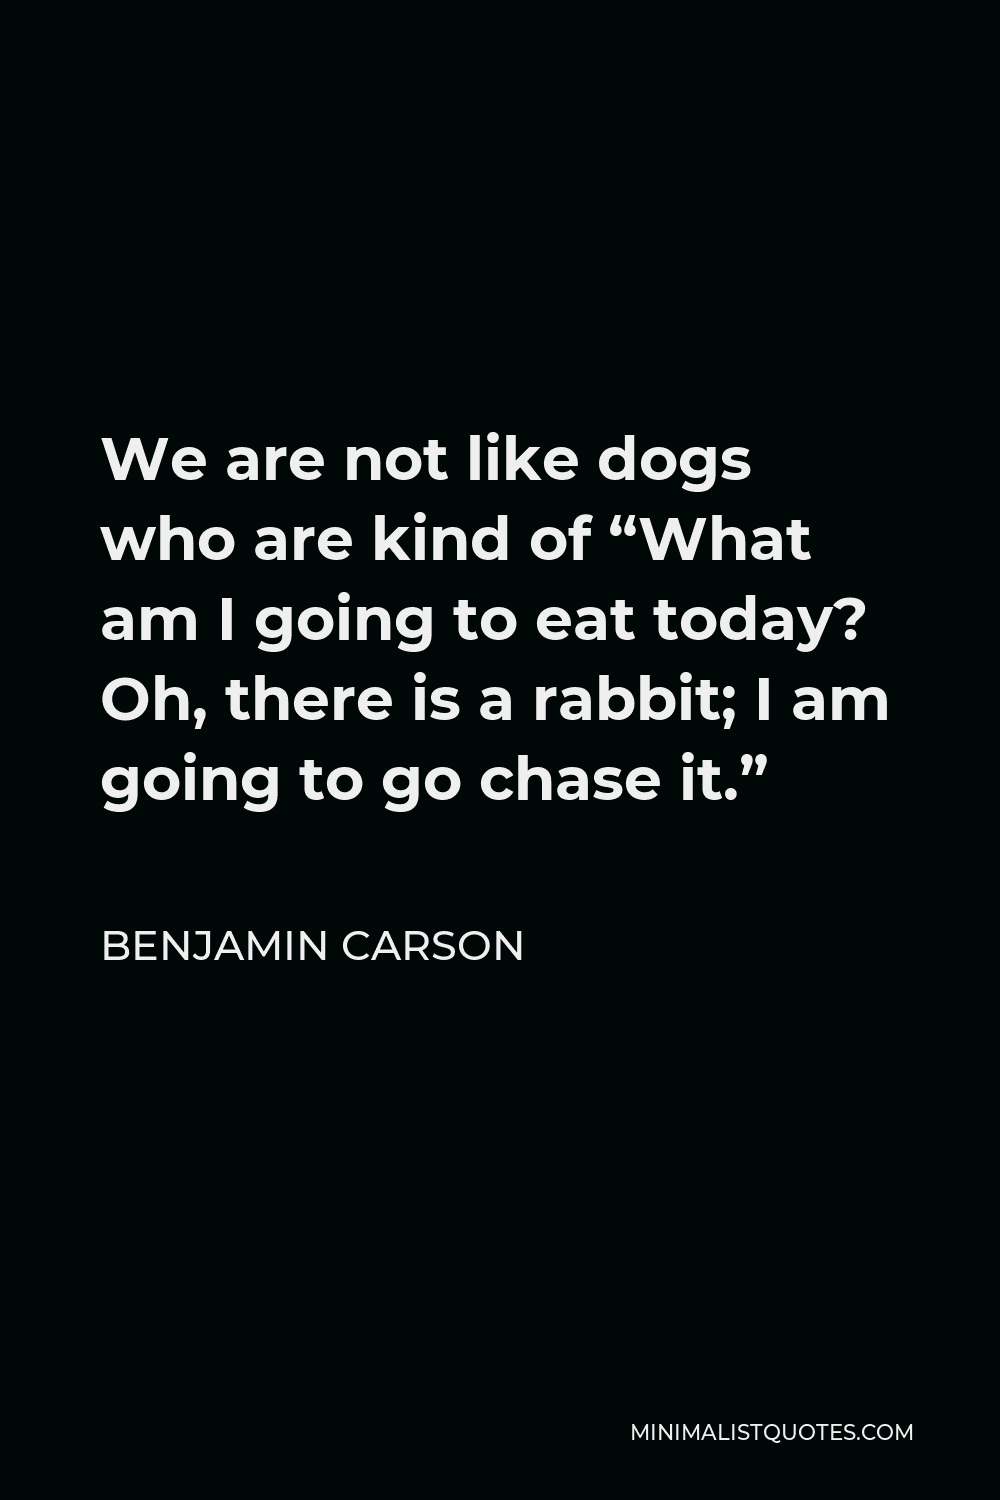 Benjamin Carson Quote - We are not like dogs who are kind of “What am I going to eat today? Oh, there is a rabbit; I am going to go chase it.”